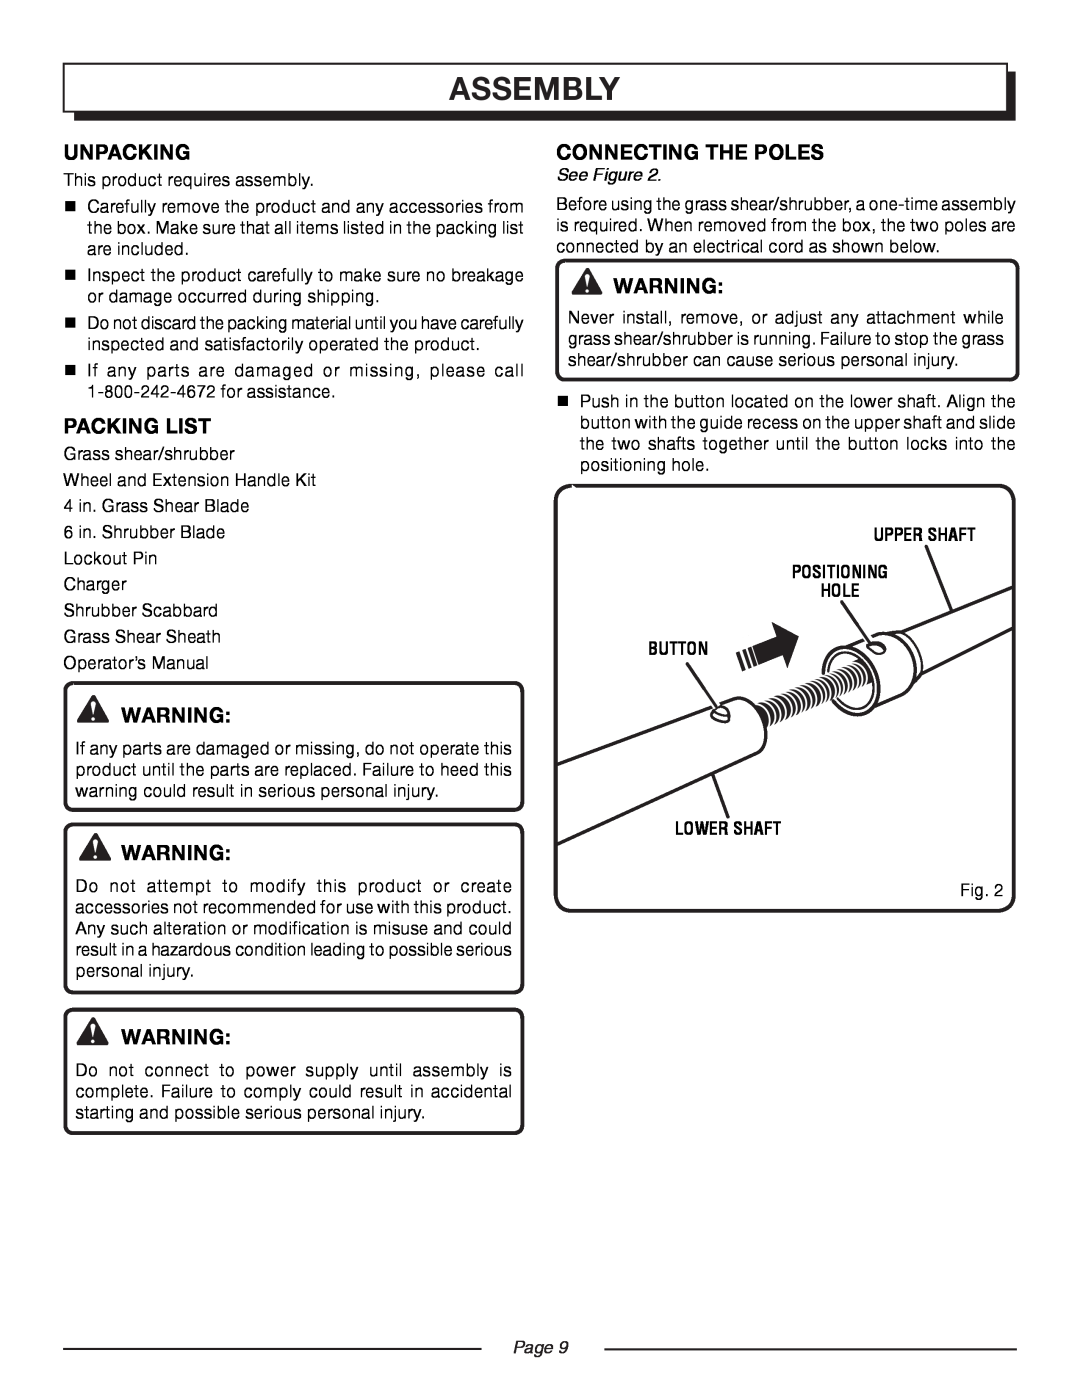 Homelite UT44170 manual Assembly, Unpacking, Packing List, connecting the poles, See Figure, Page  